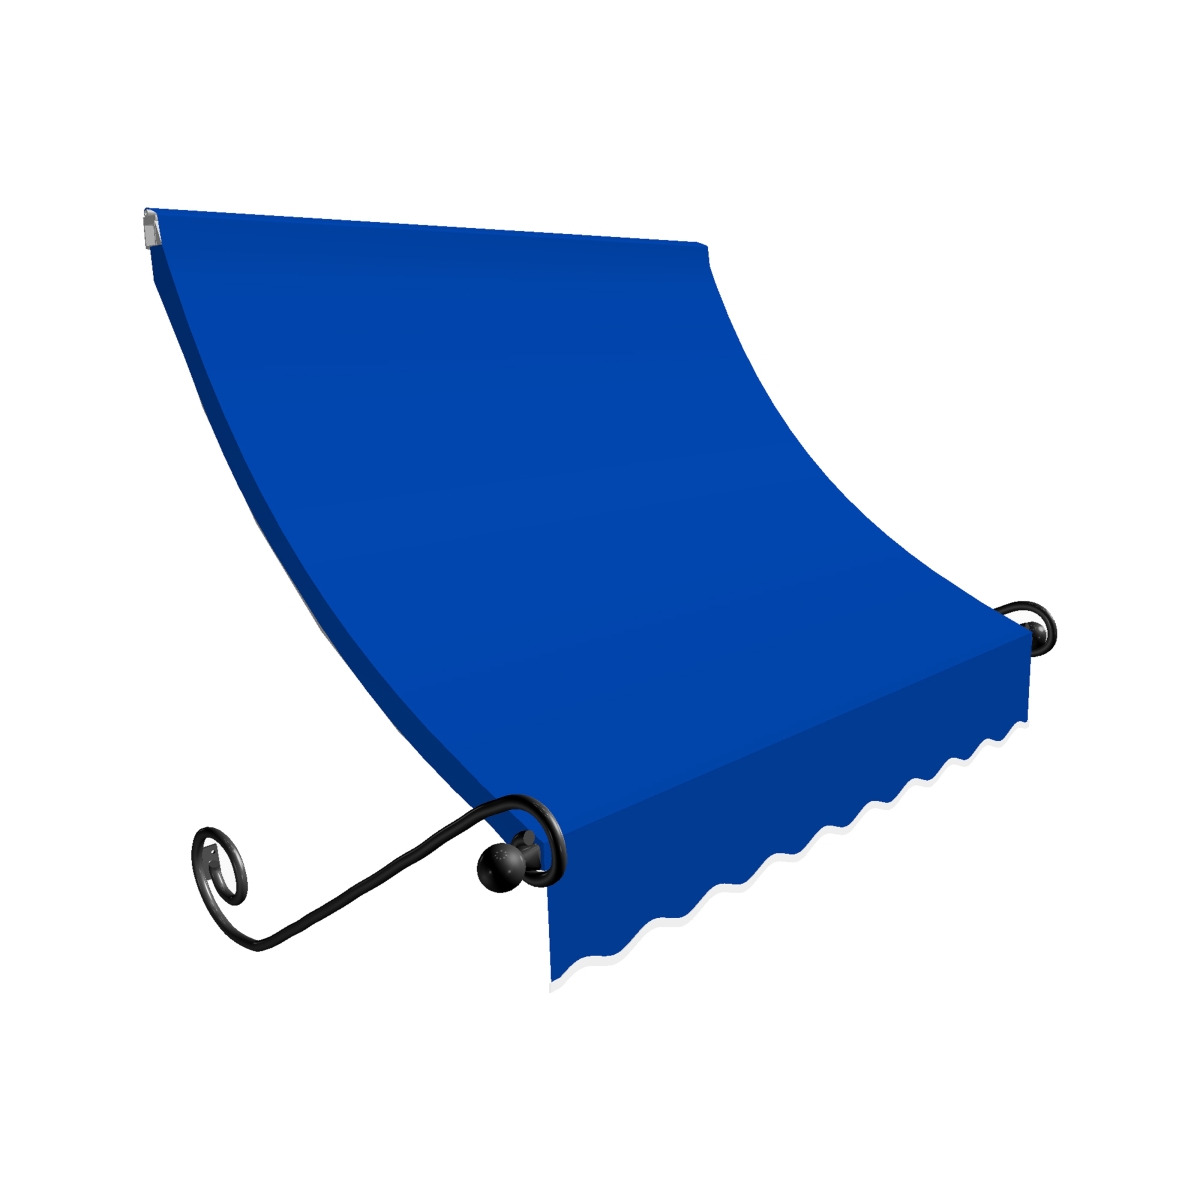 Ch33-us-6bb 6.38 Ft. Charleston Window & Entry Awning, Bright Blue - 44 X 36 In.